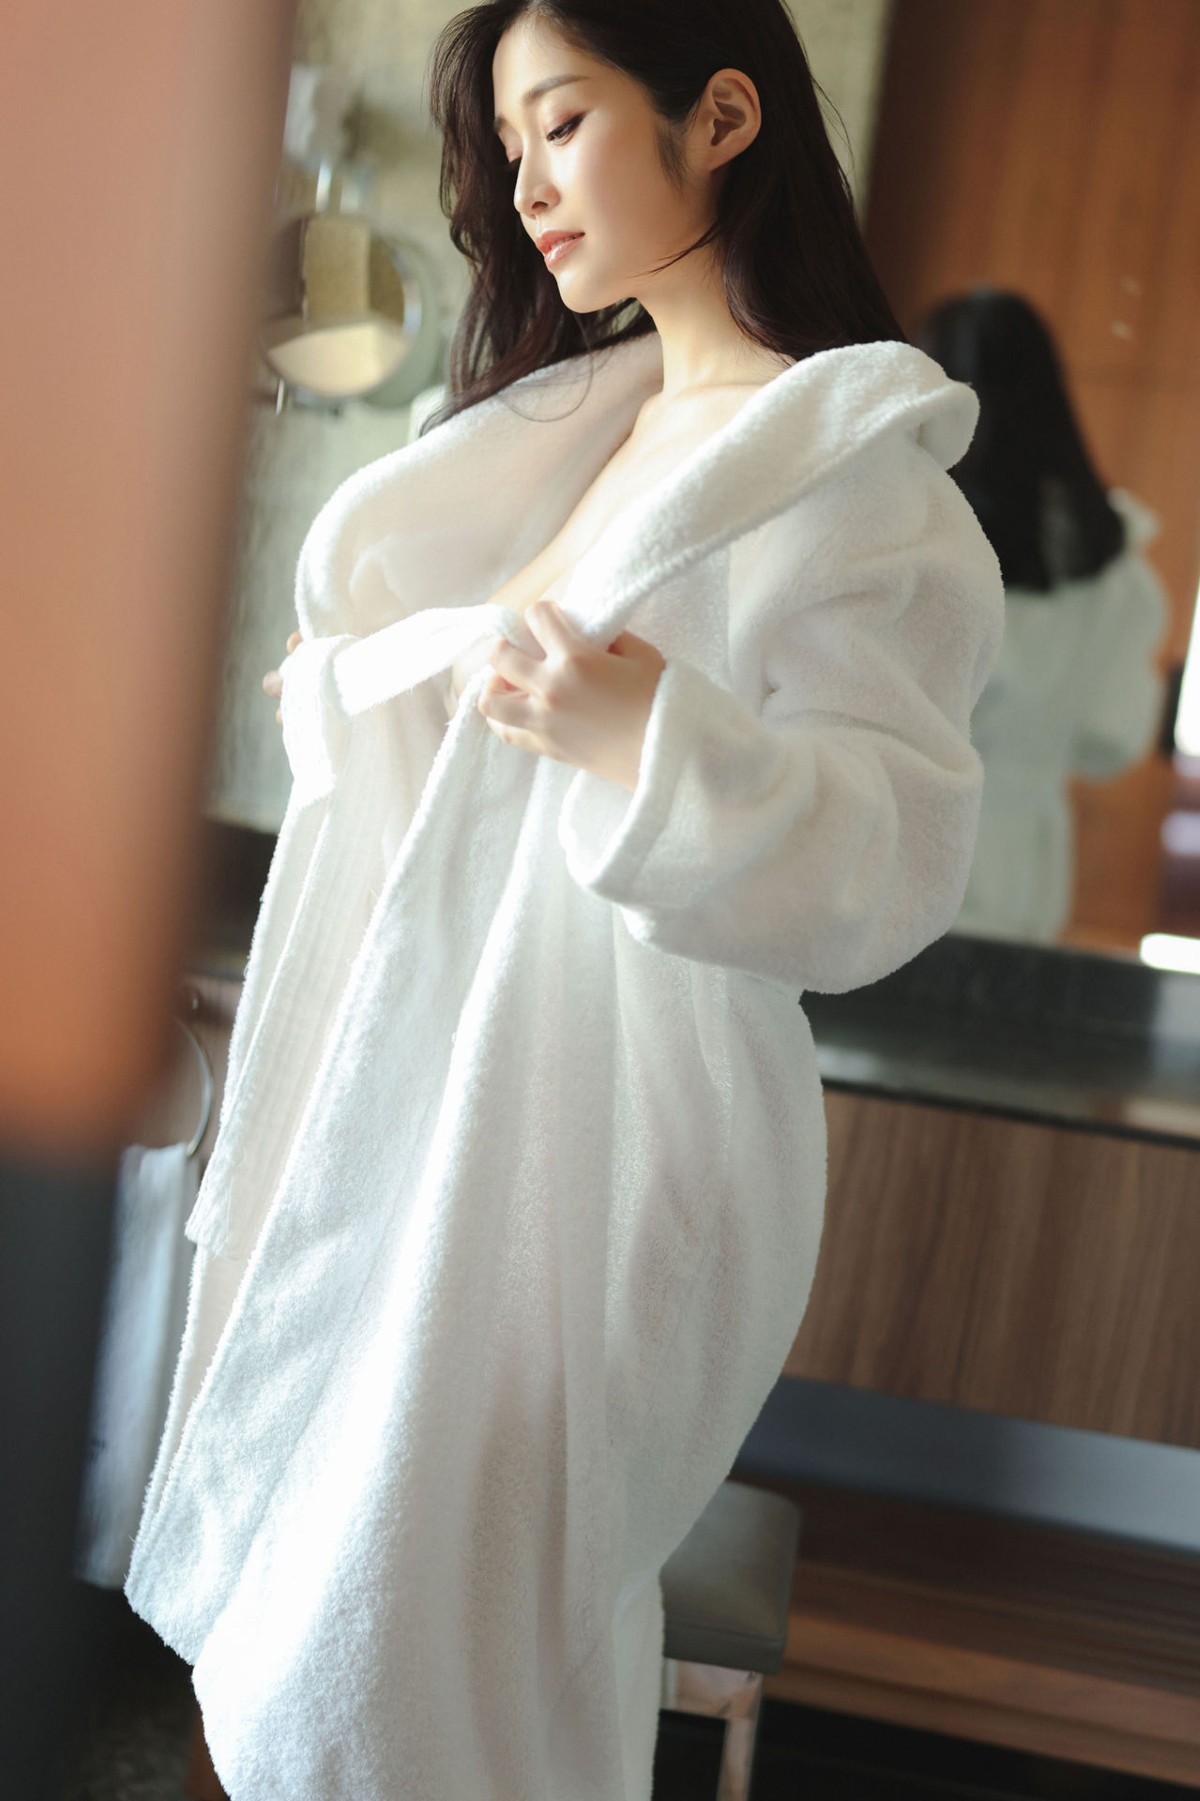 FRIDAY Digital Photobook 2023 02 10 Rin Takahashi 高橋凛 In A Suite Room With An I Cup Beauty Vol 2 0018 7372614317.jpg